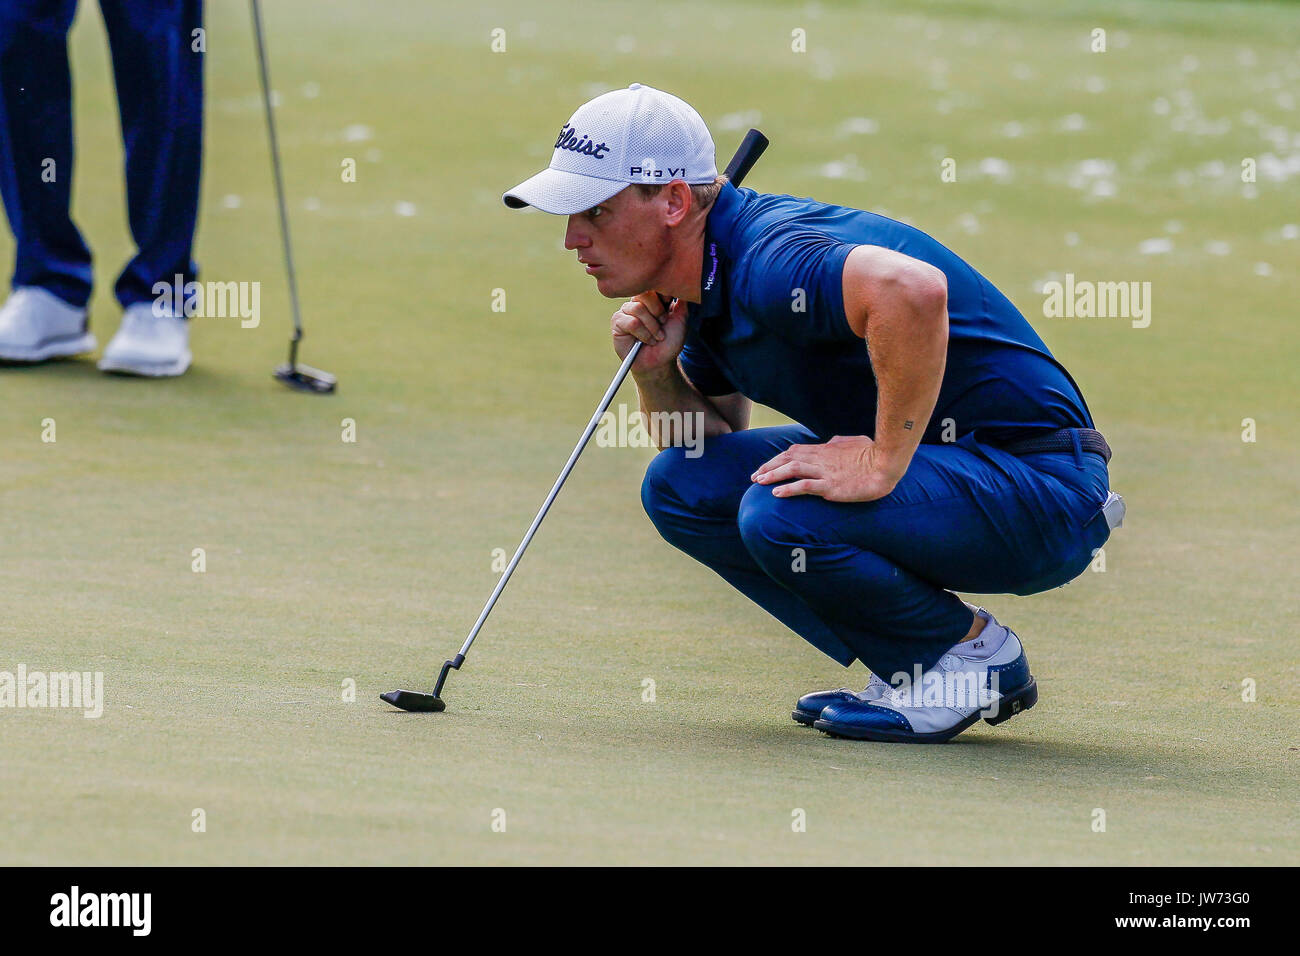 August 10, 2017: Bud Cauley of the United States finds a line on the eighth green during the first round of the 99th PGA Championship at Quail Hollow Club in Charlotte, NC. (Scott Kinser/Cal Sport Media) Stock Photo